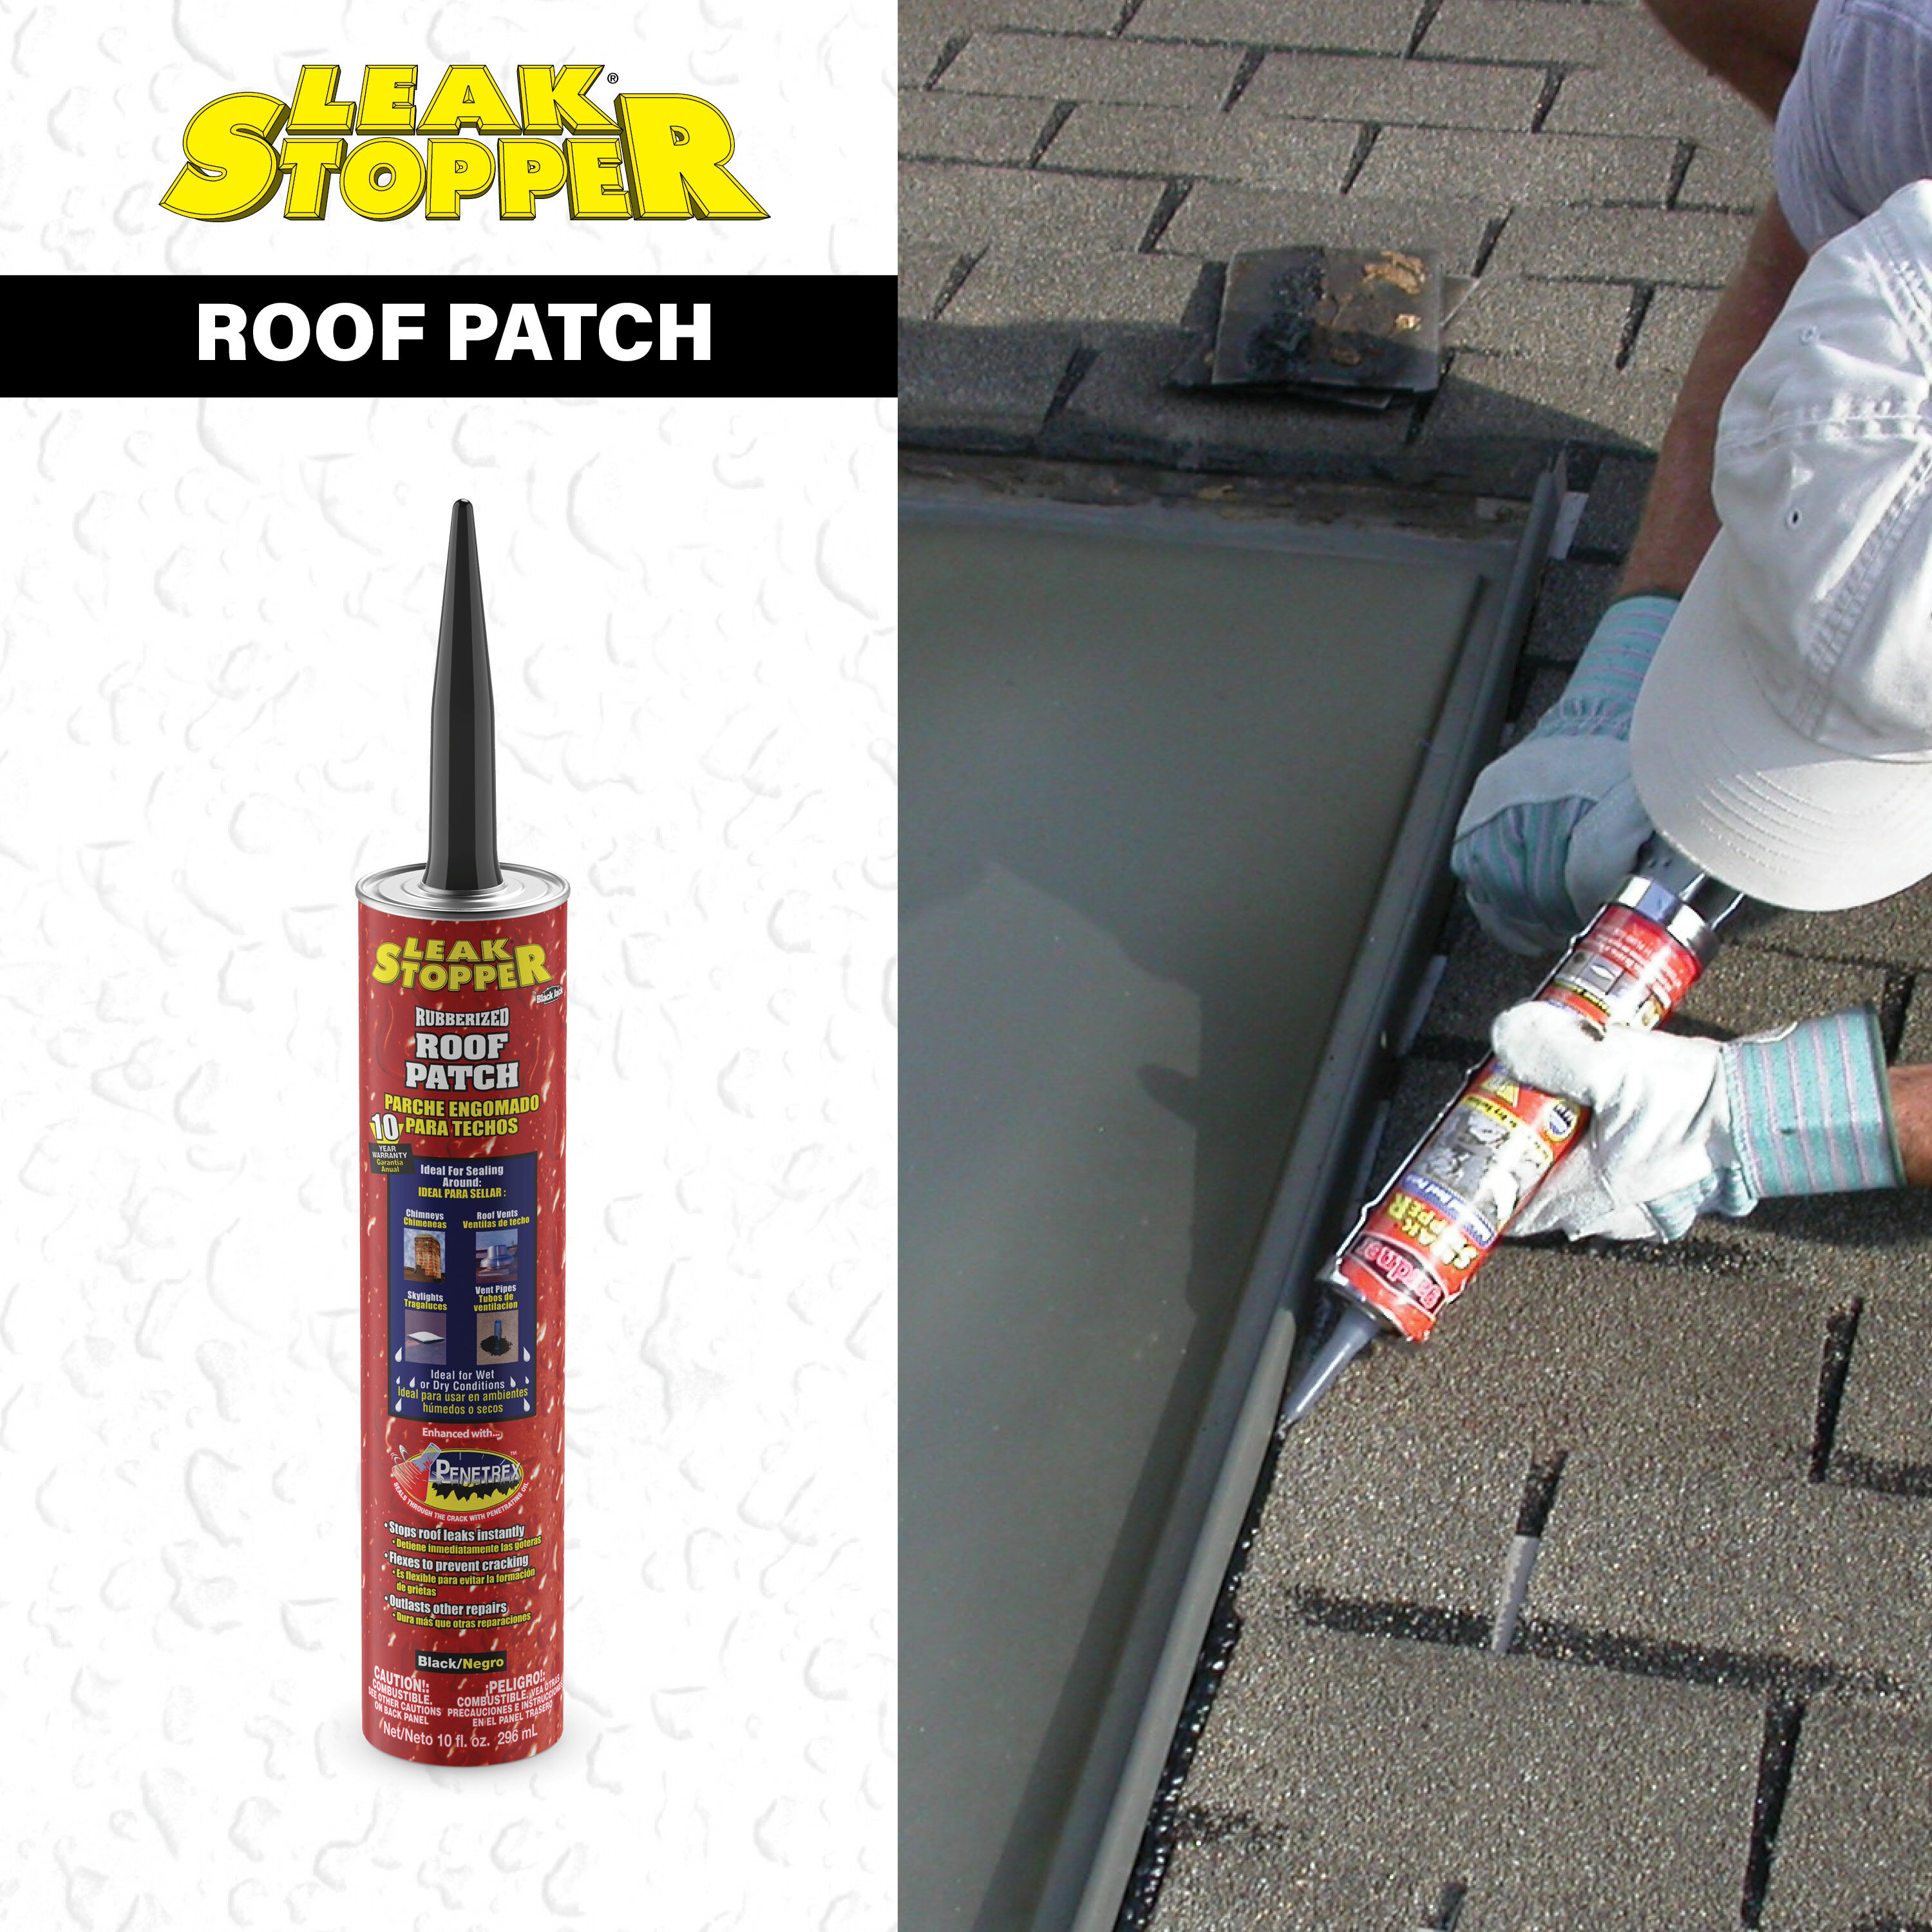 Leak Stopper Rubberized Roof Patch 1 Gallon | 100% Flexible Instant Sealant  for Built-Up Roofs, SBS Modified Roofs, Metal Roofs & Many Other Surfaces